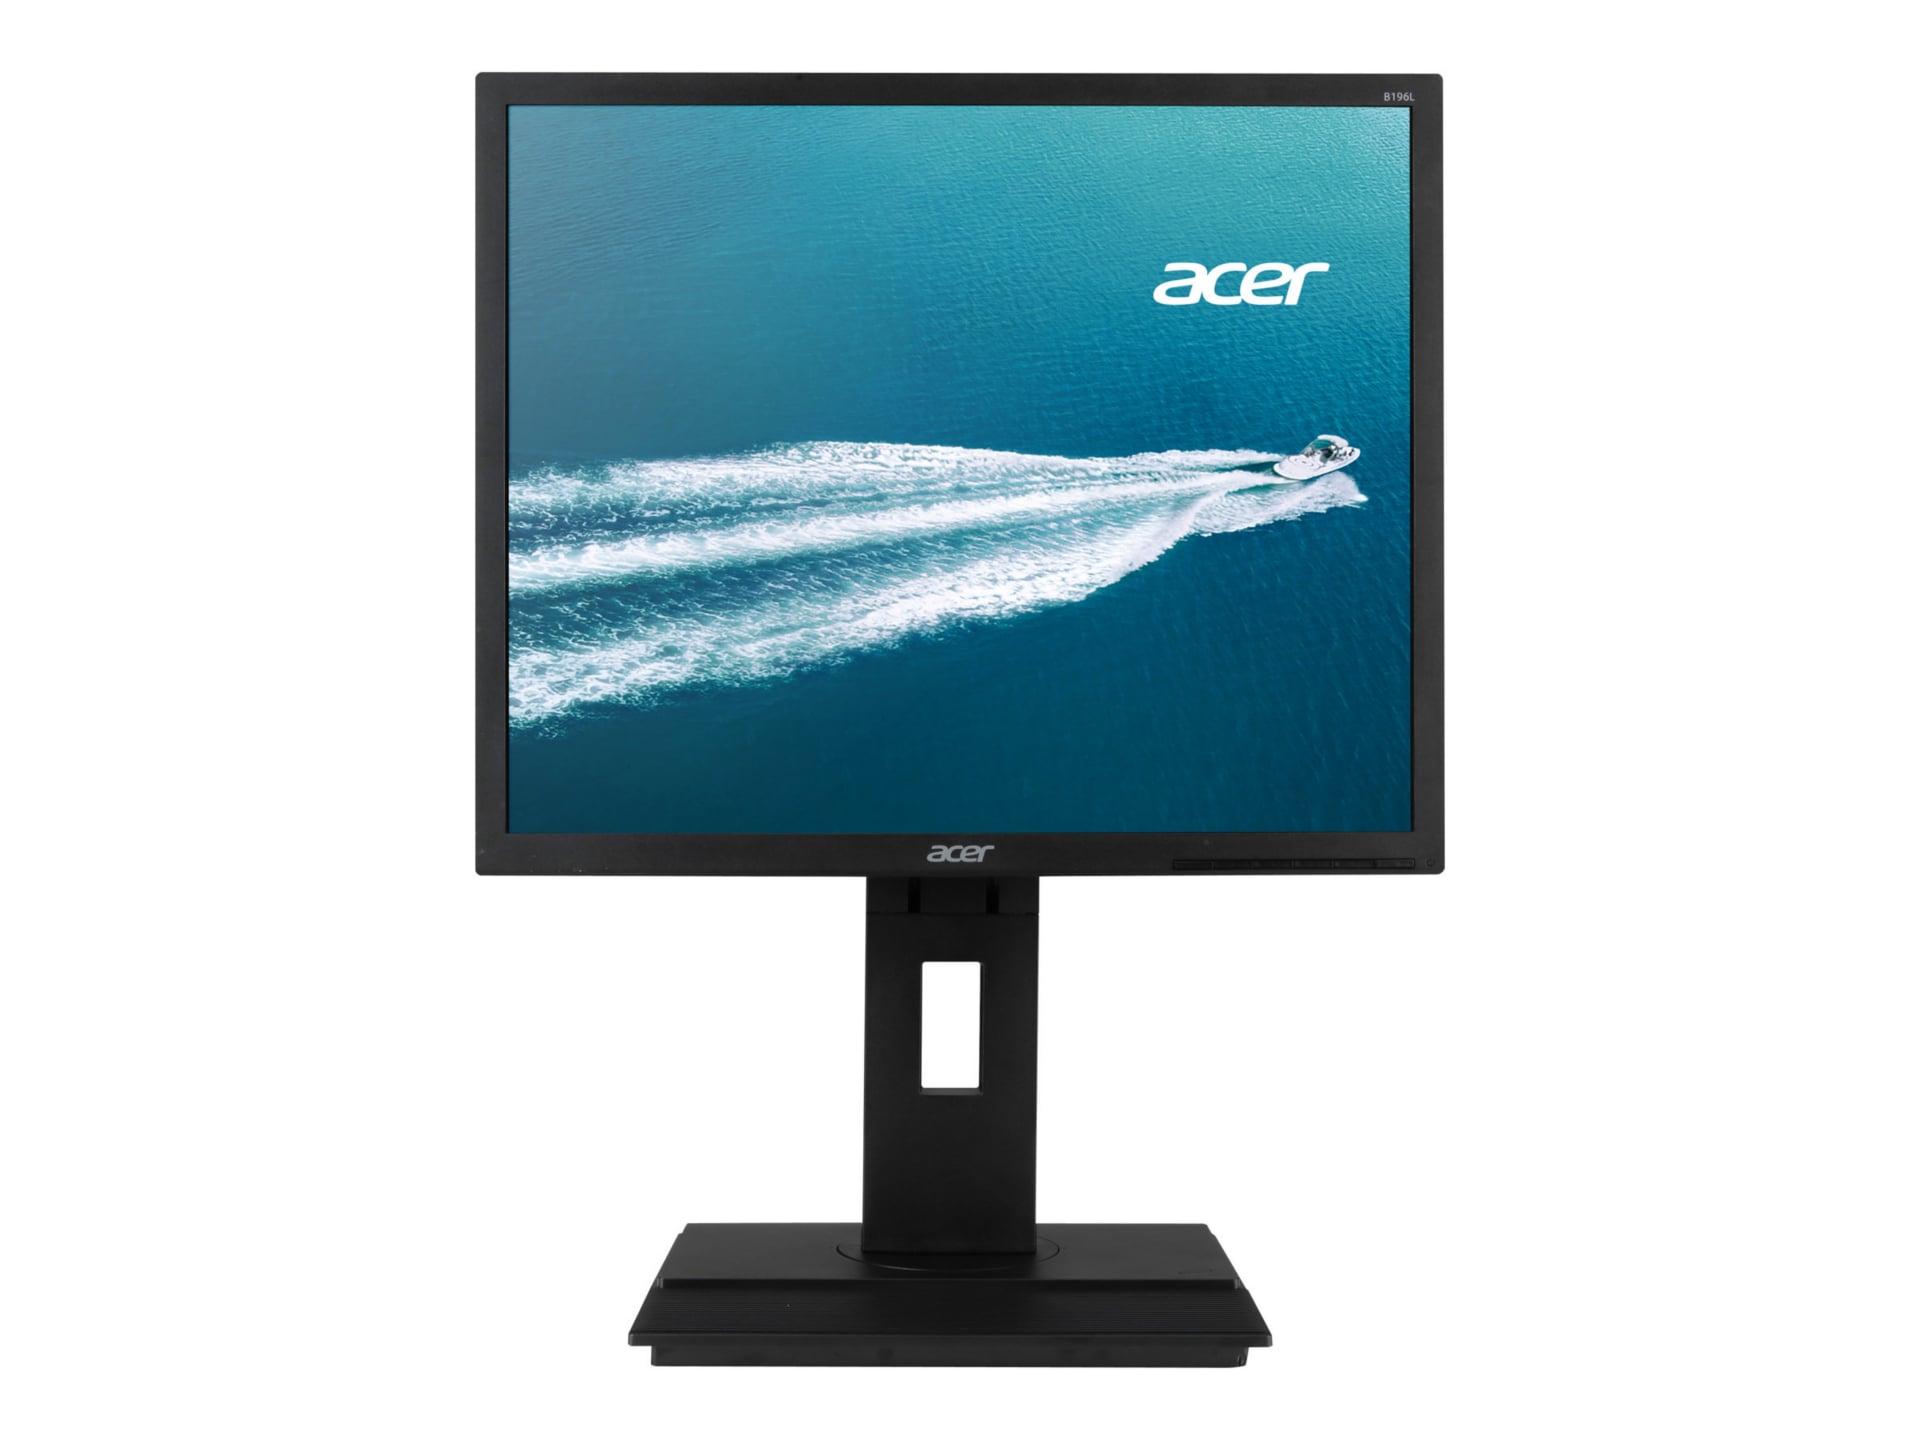 Acer Professional Monitors